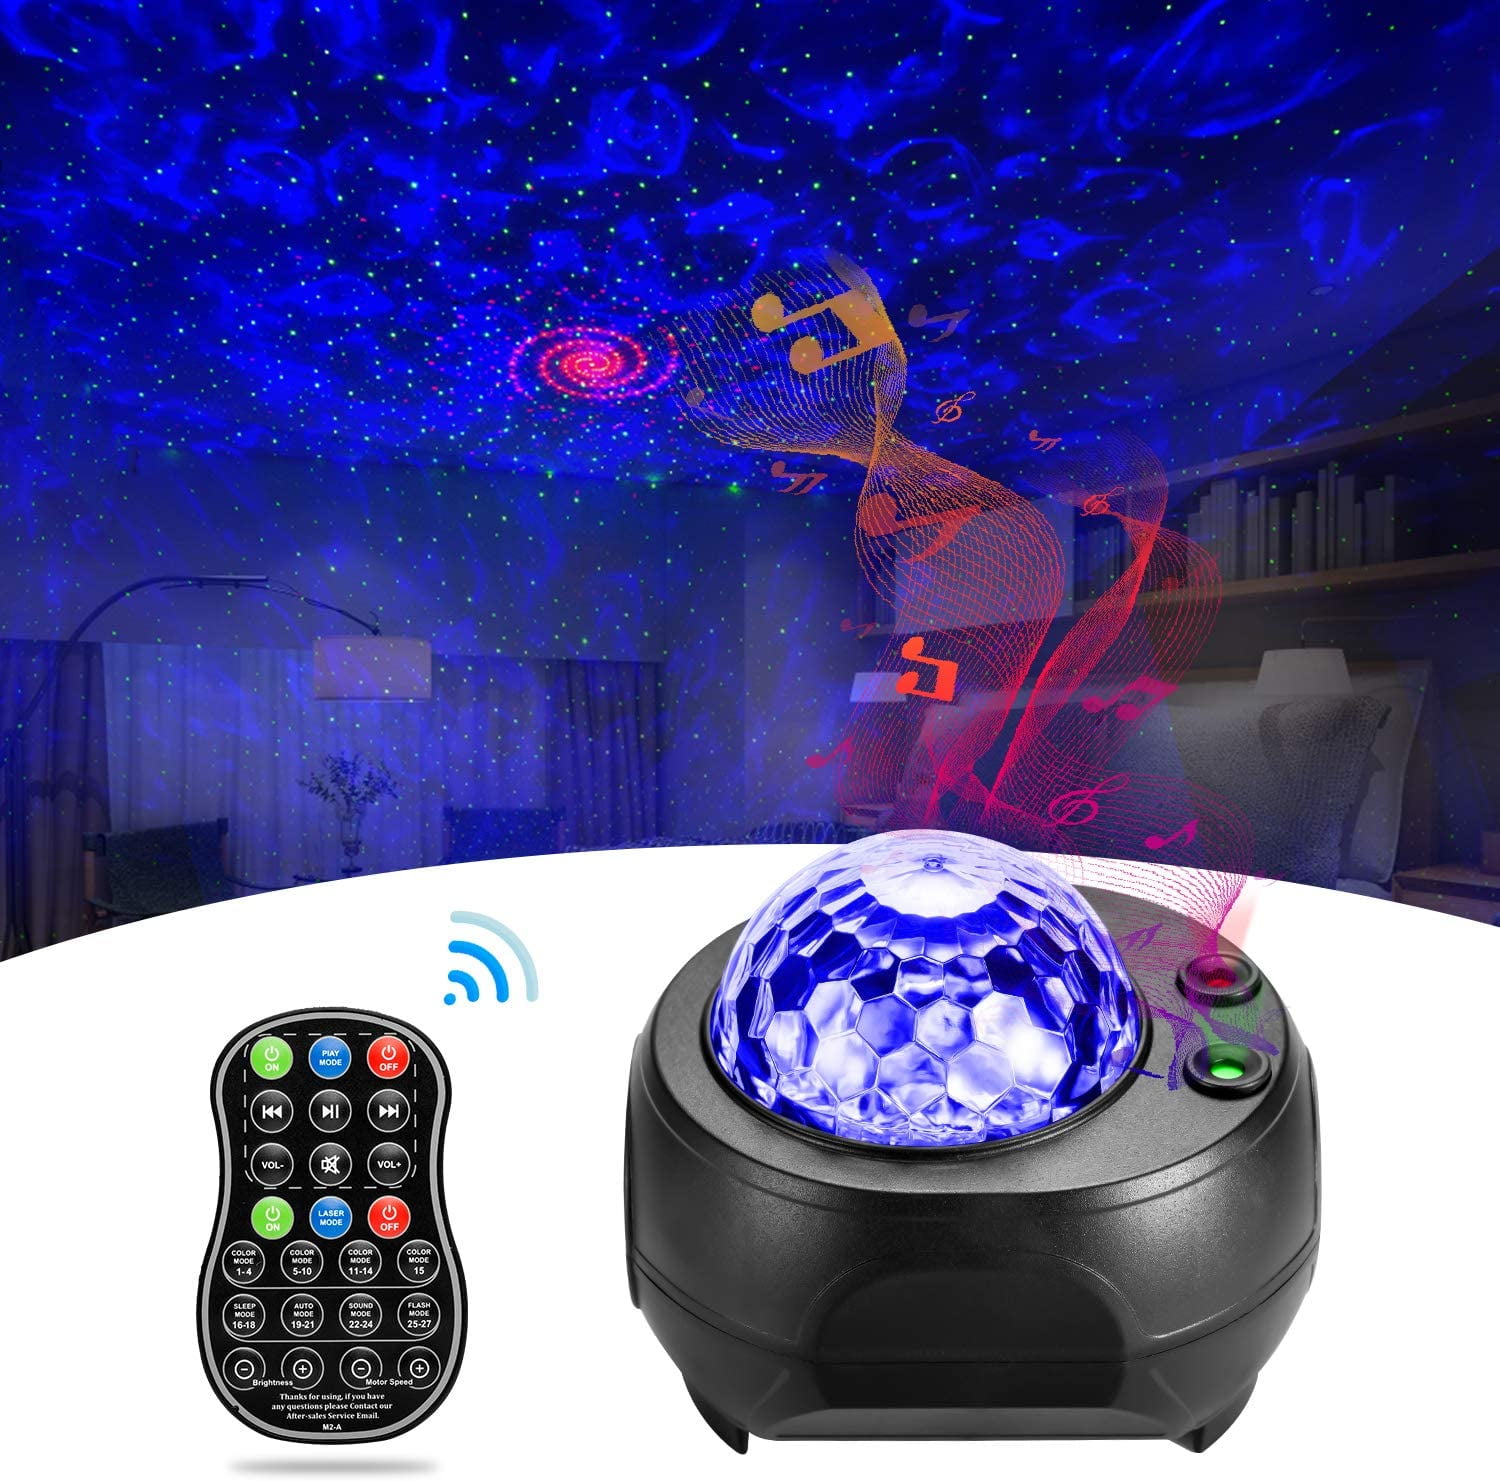 Laser Star Projector for Ceiling for Adults Galaxy Projector for Bedroom Ocean Wave Night Light Music Starry Projector with Bluetooth Music Speaker Remote Control Relaxation Ambiance Nebula Projector 